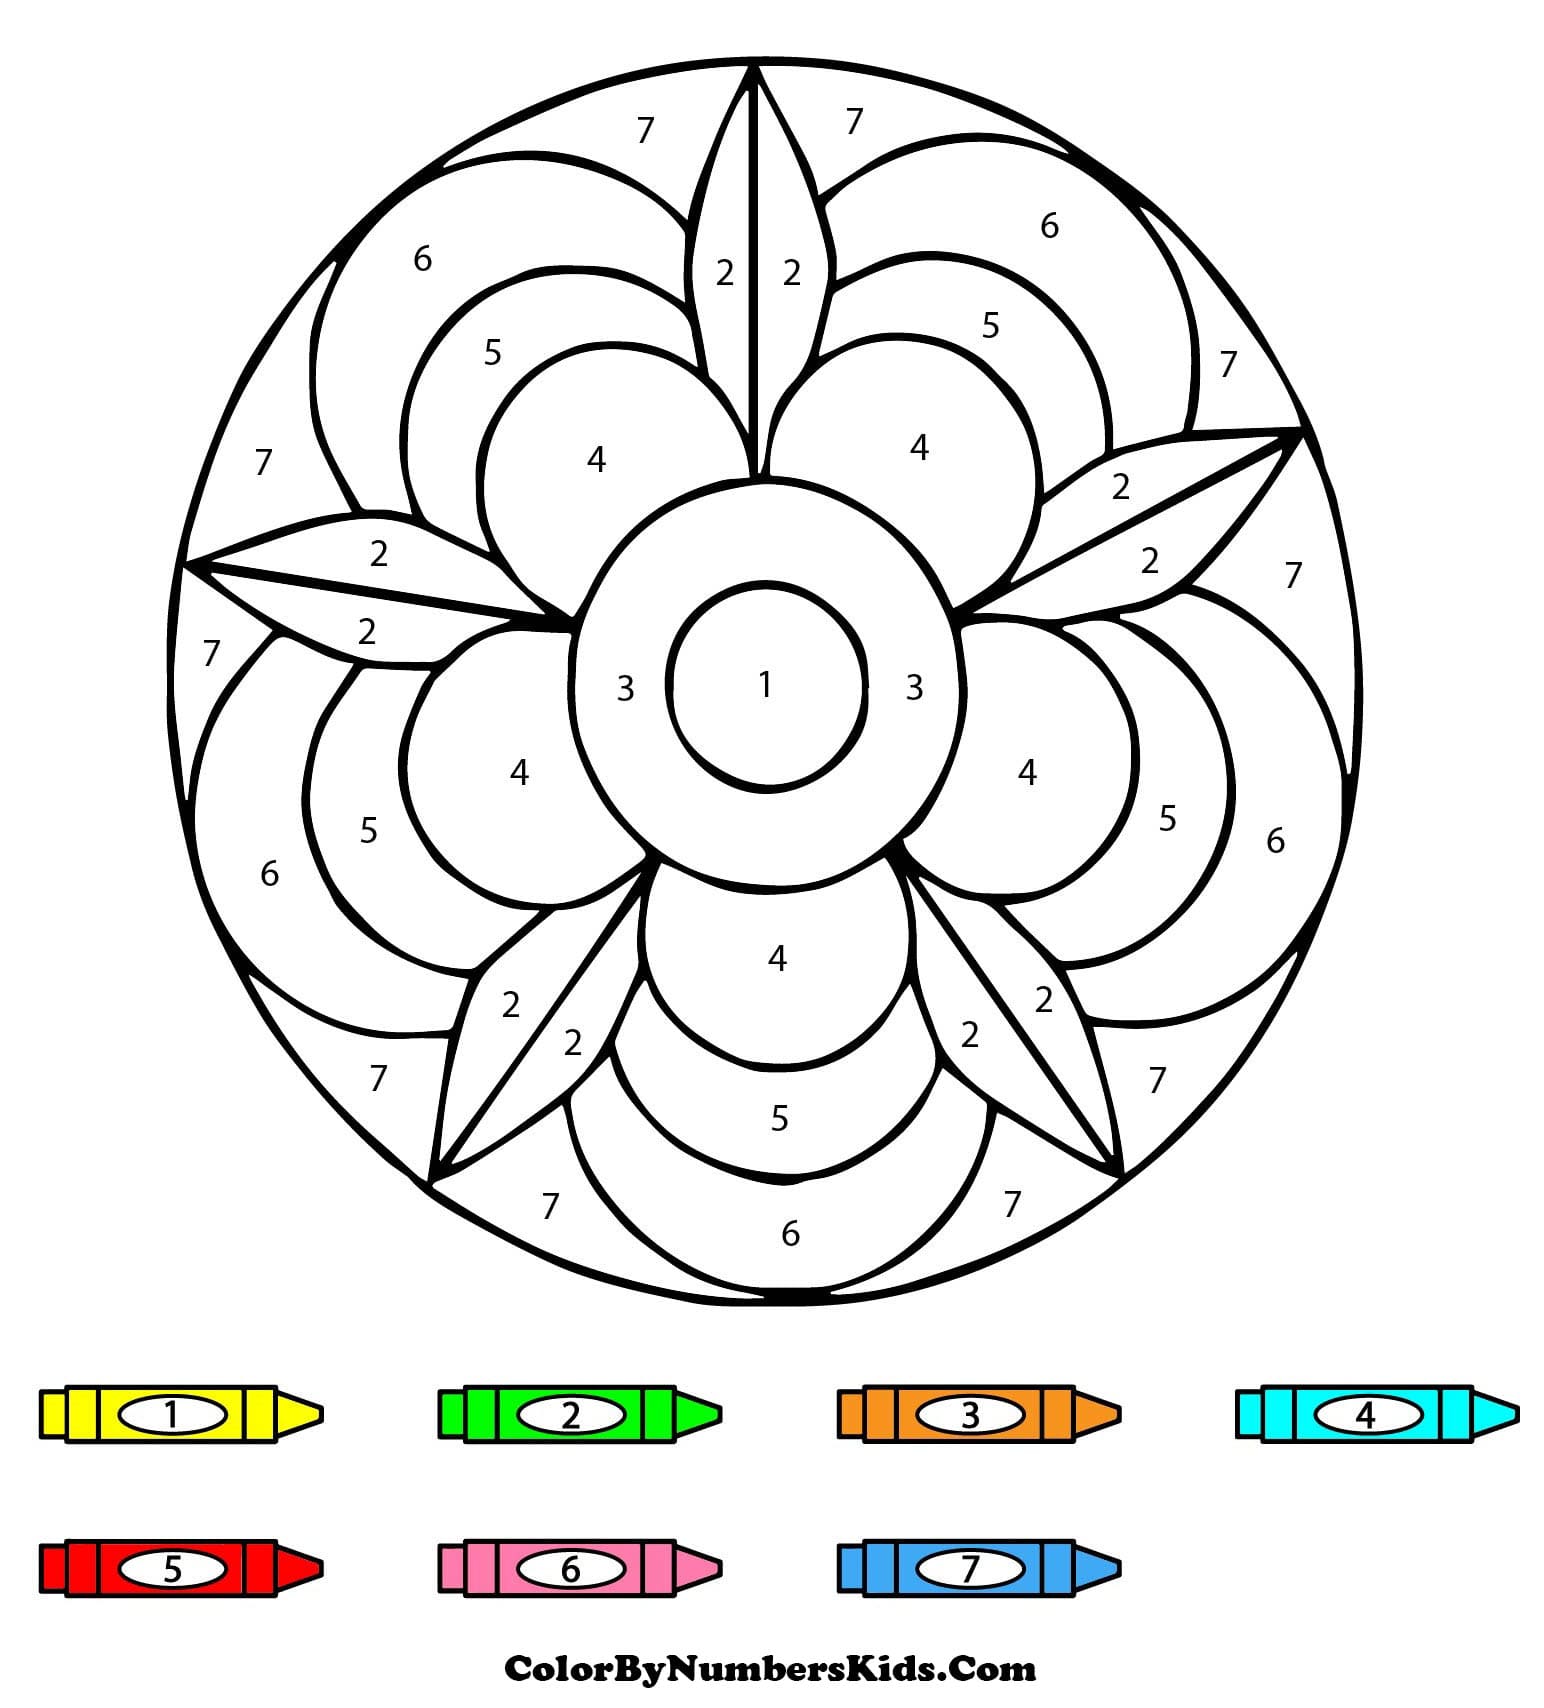 Flower and Leaves Mandala Color By Number